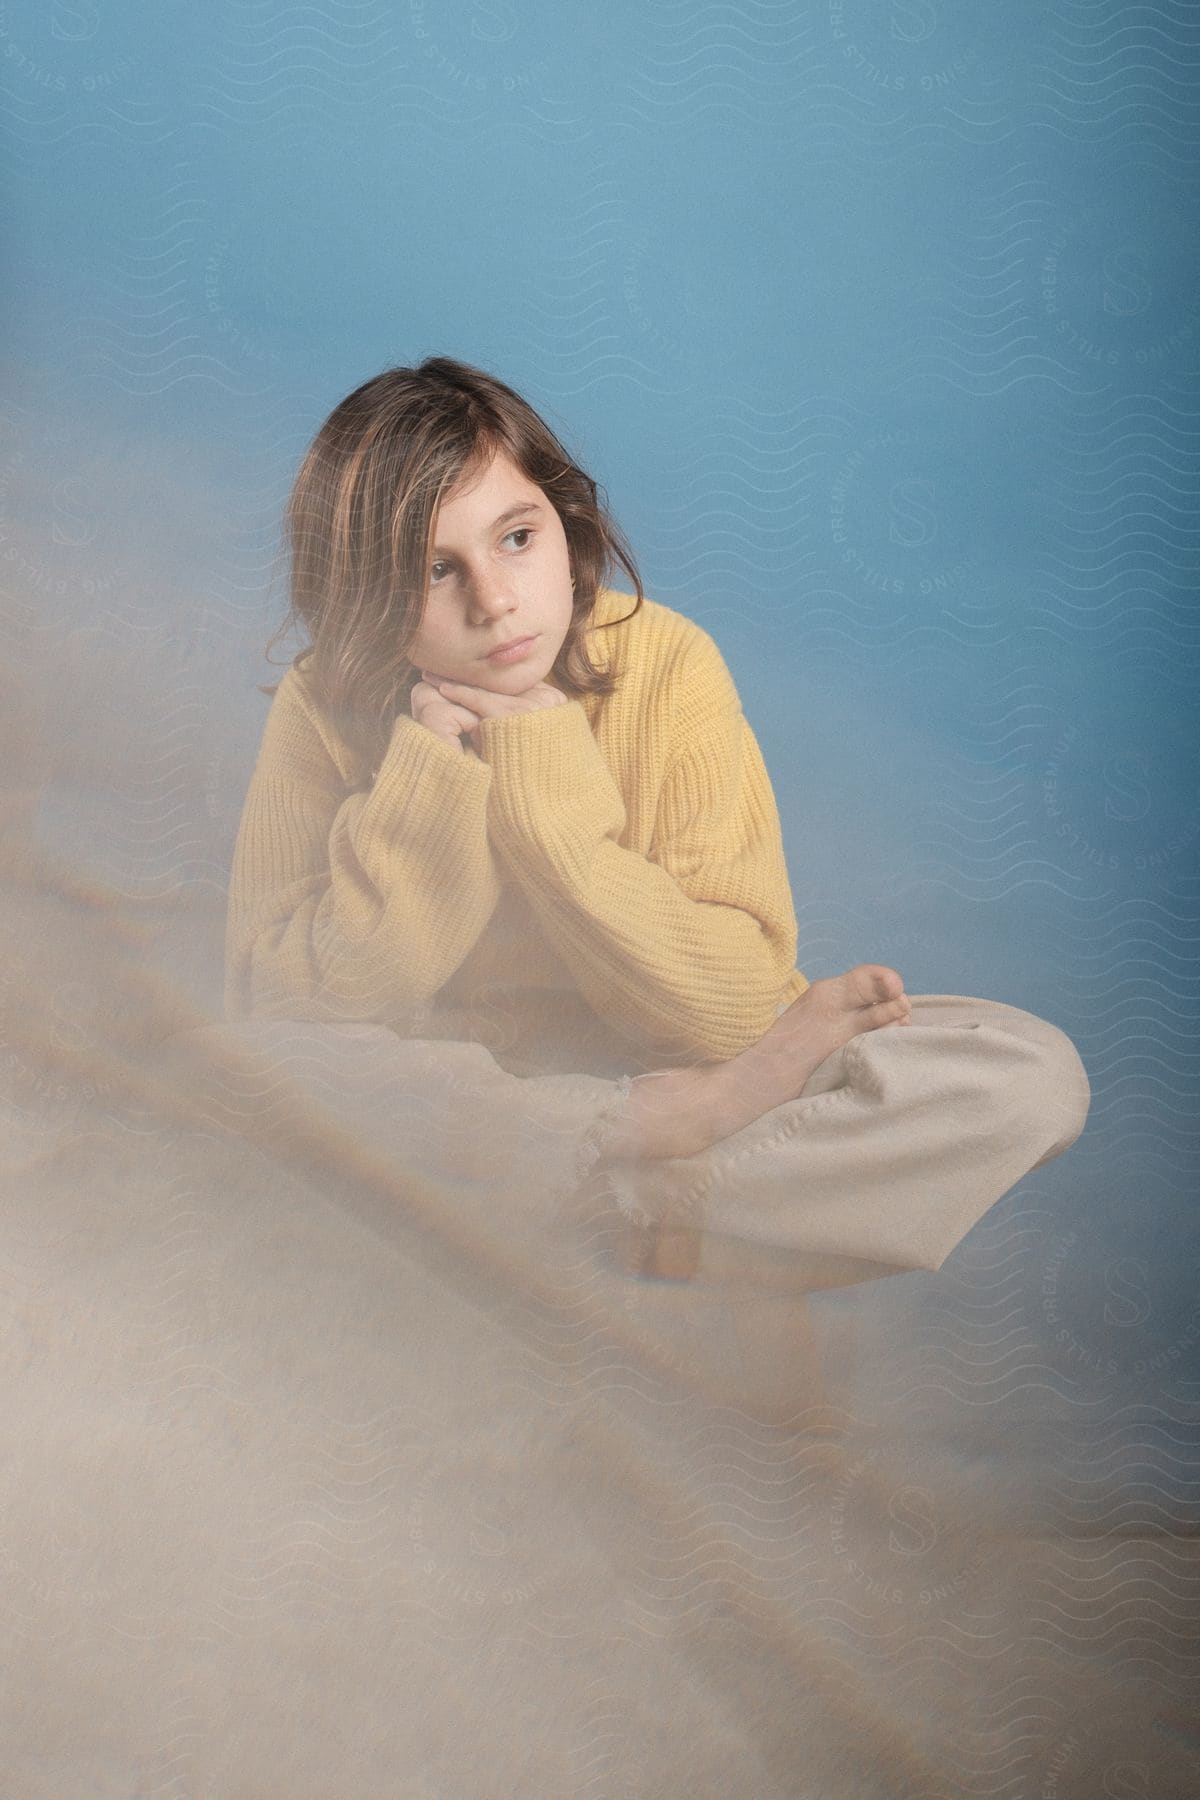 A boy wearing a knitted sweater is sitting in a lotus yoga pose.